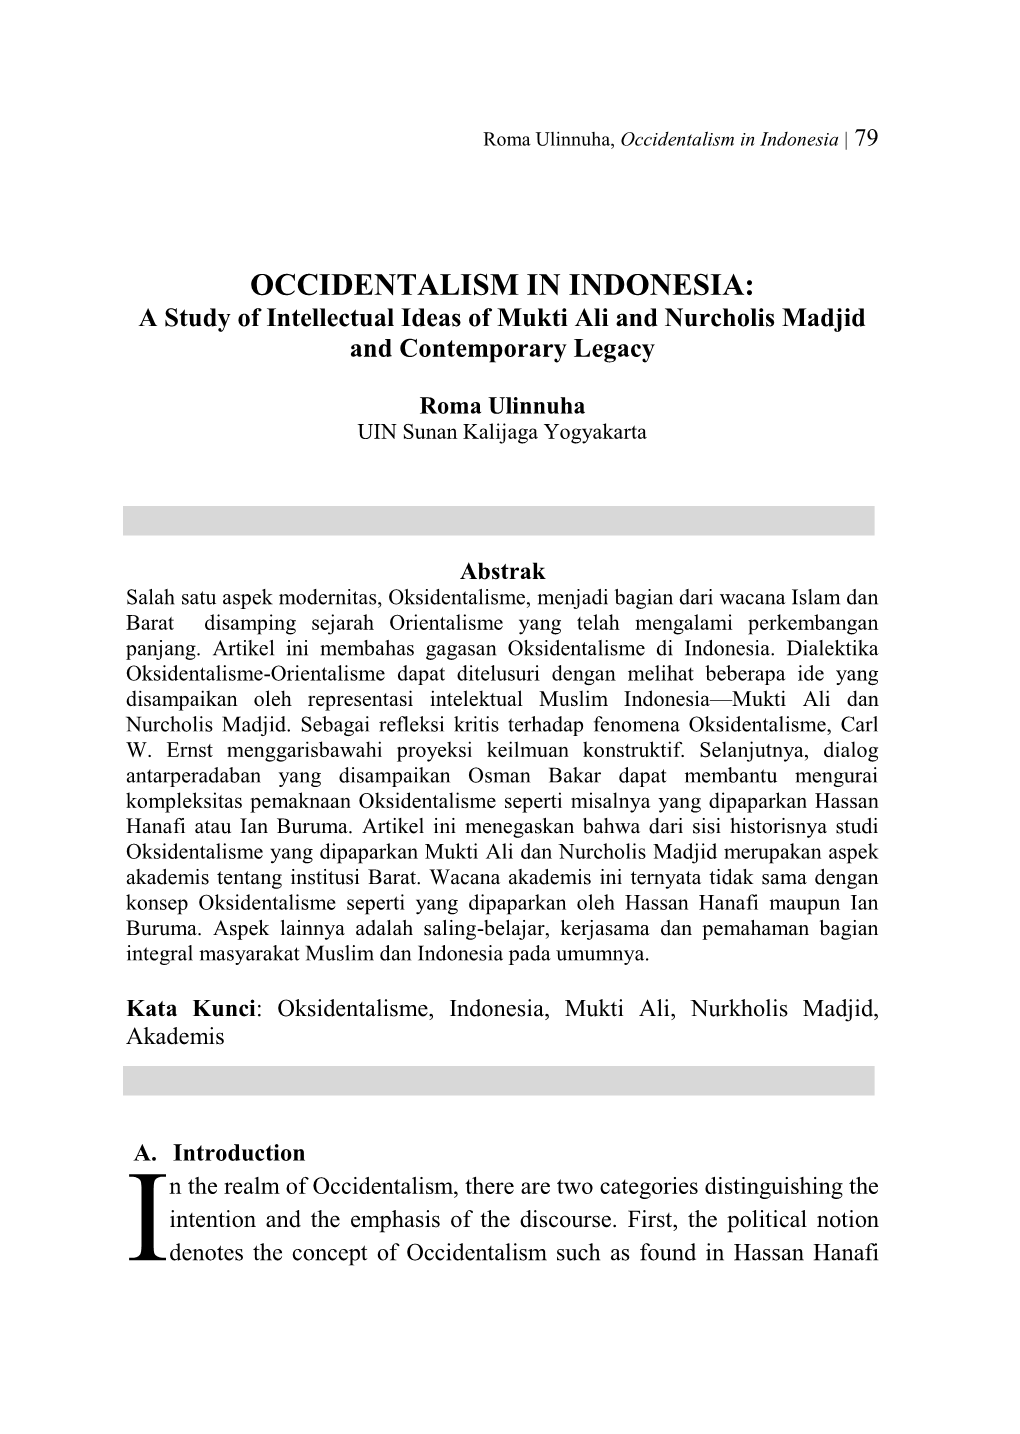 OCCIDENTALISM in INDONESIA: a Study of Intellectual Ideas of Mukti Ali and Nurcholis Madjid and Contemporary Legacy